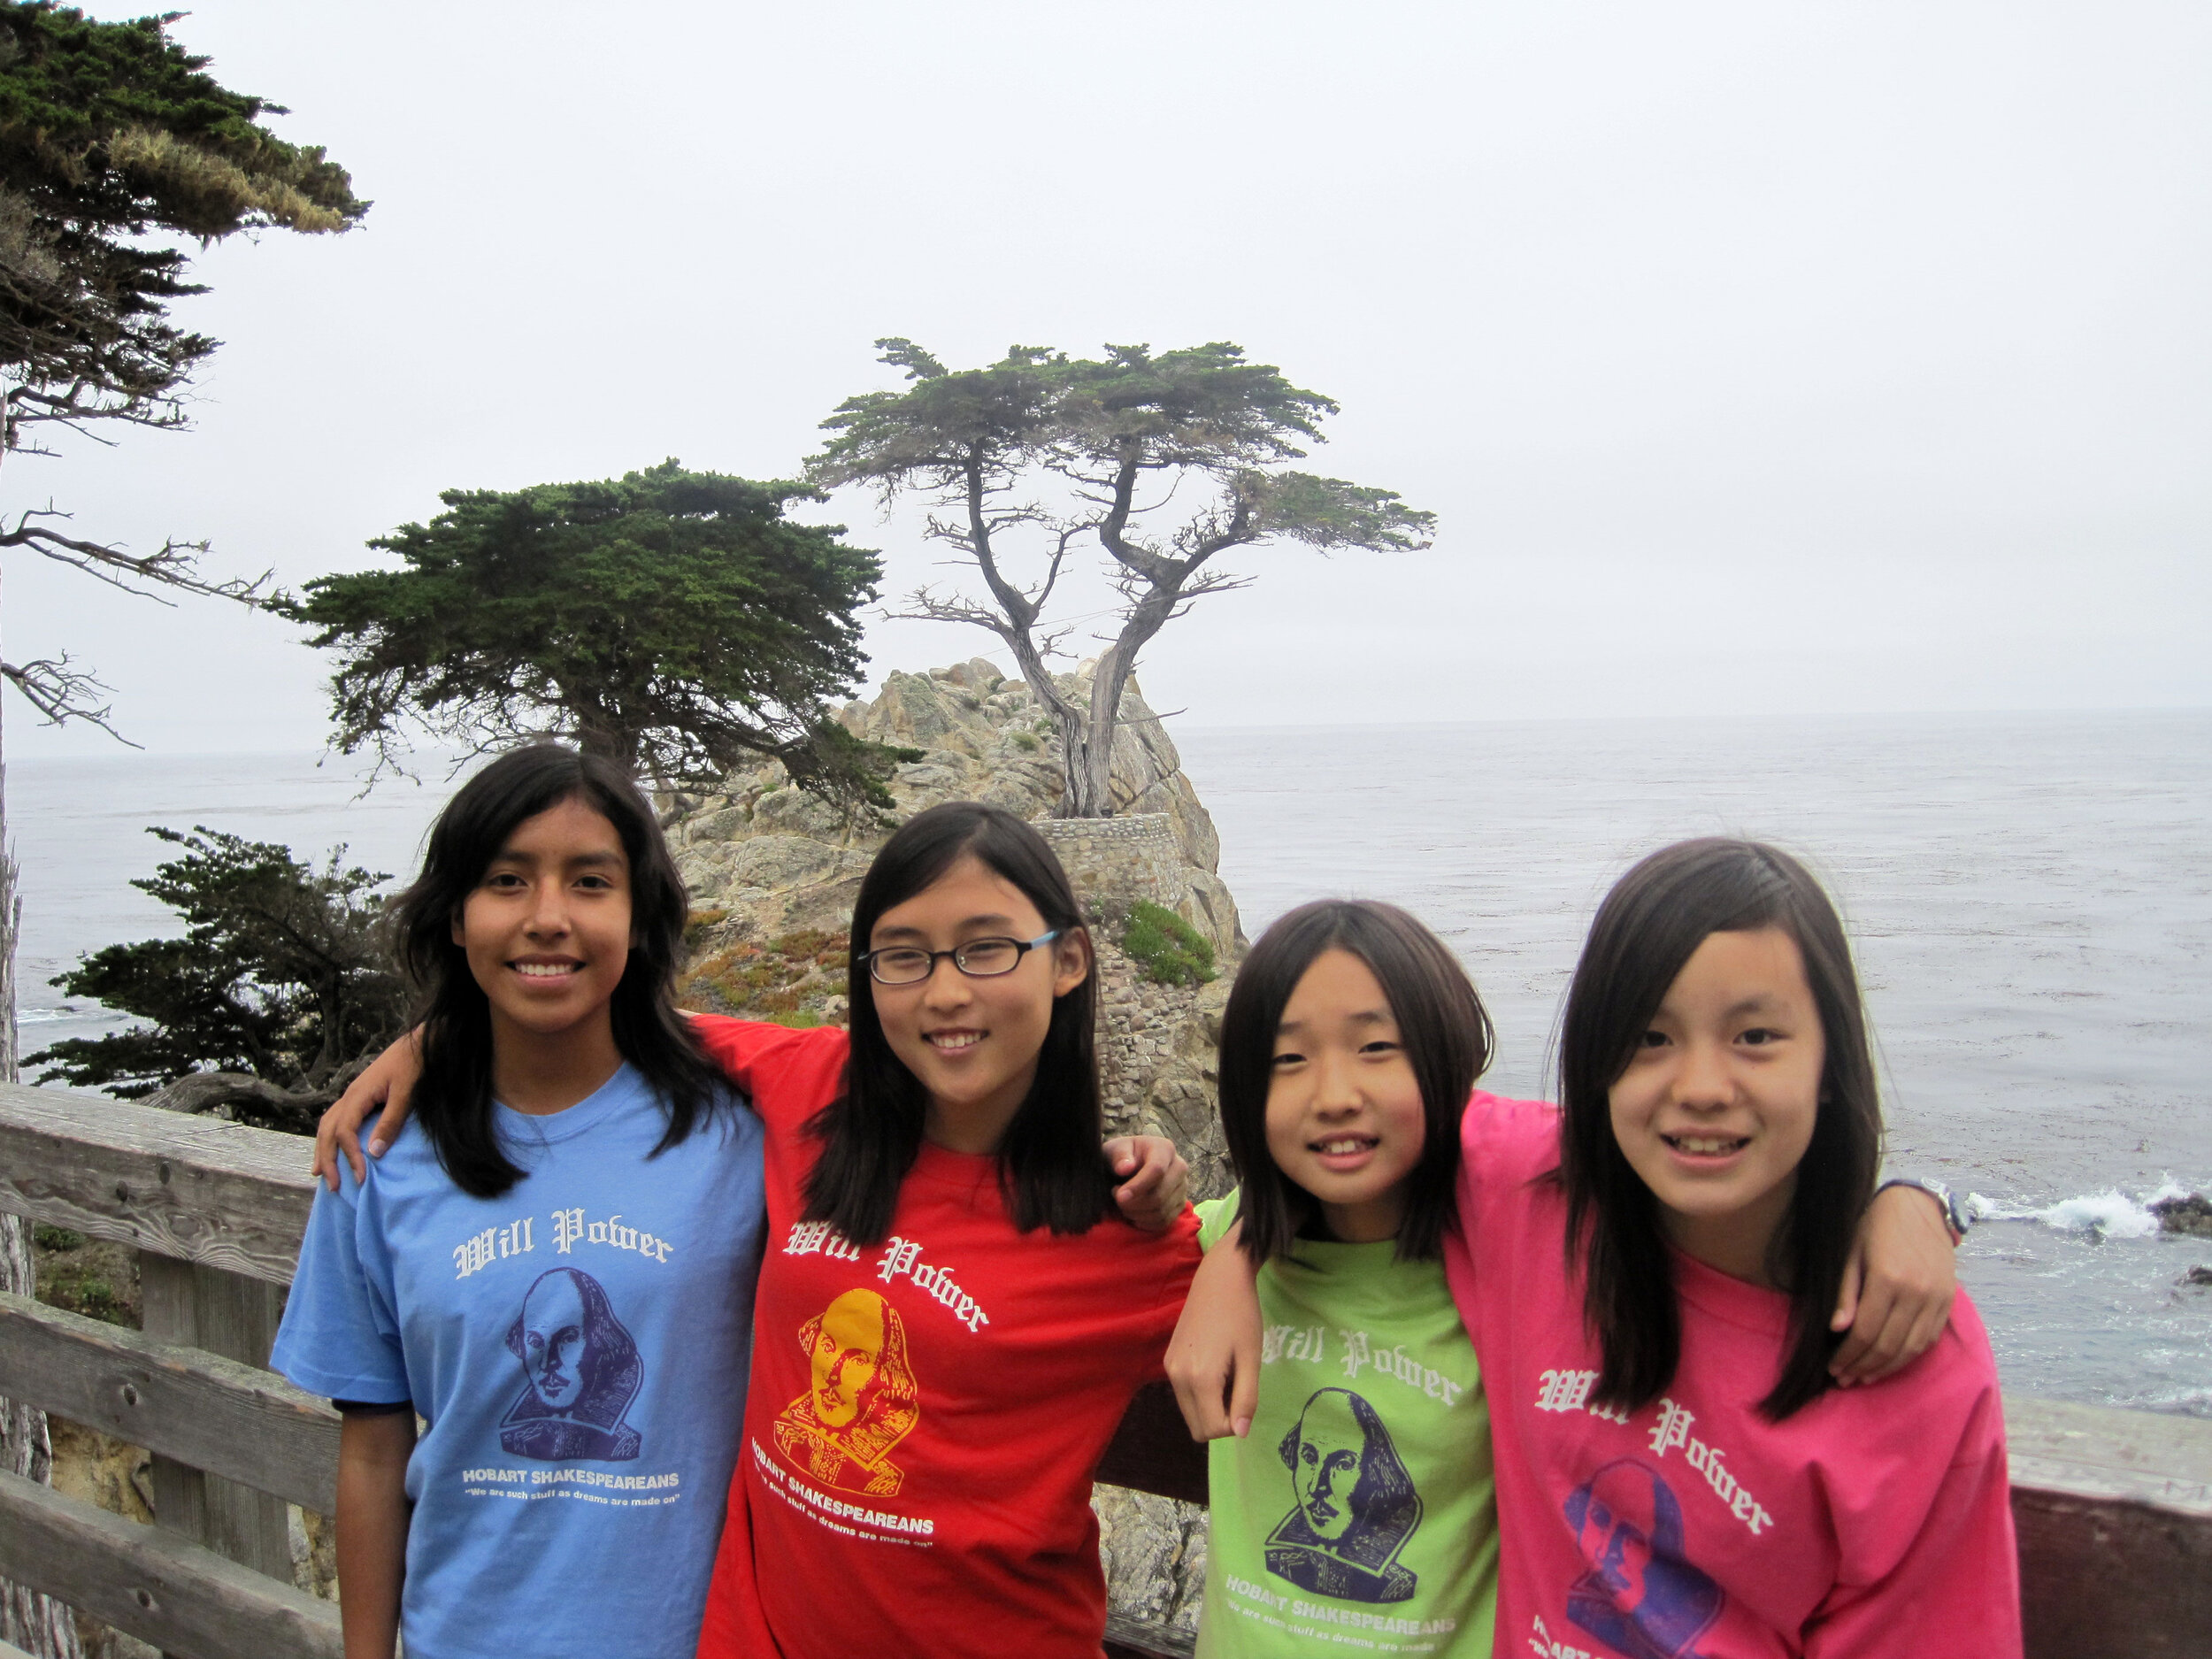  At the Lone Cypress 